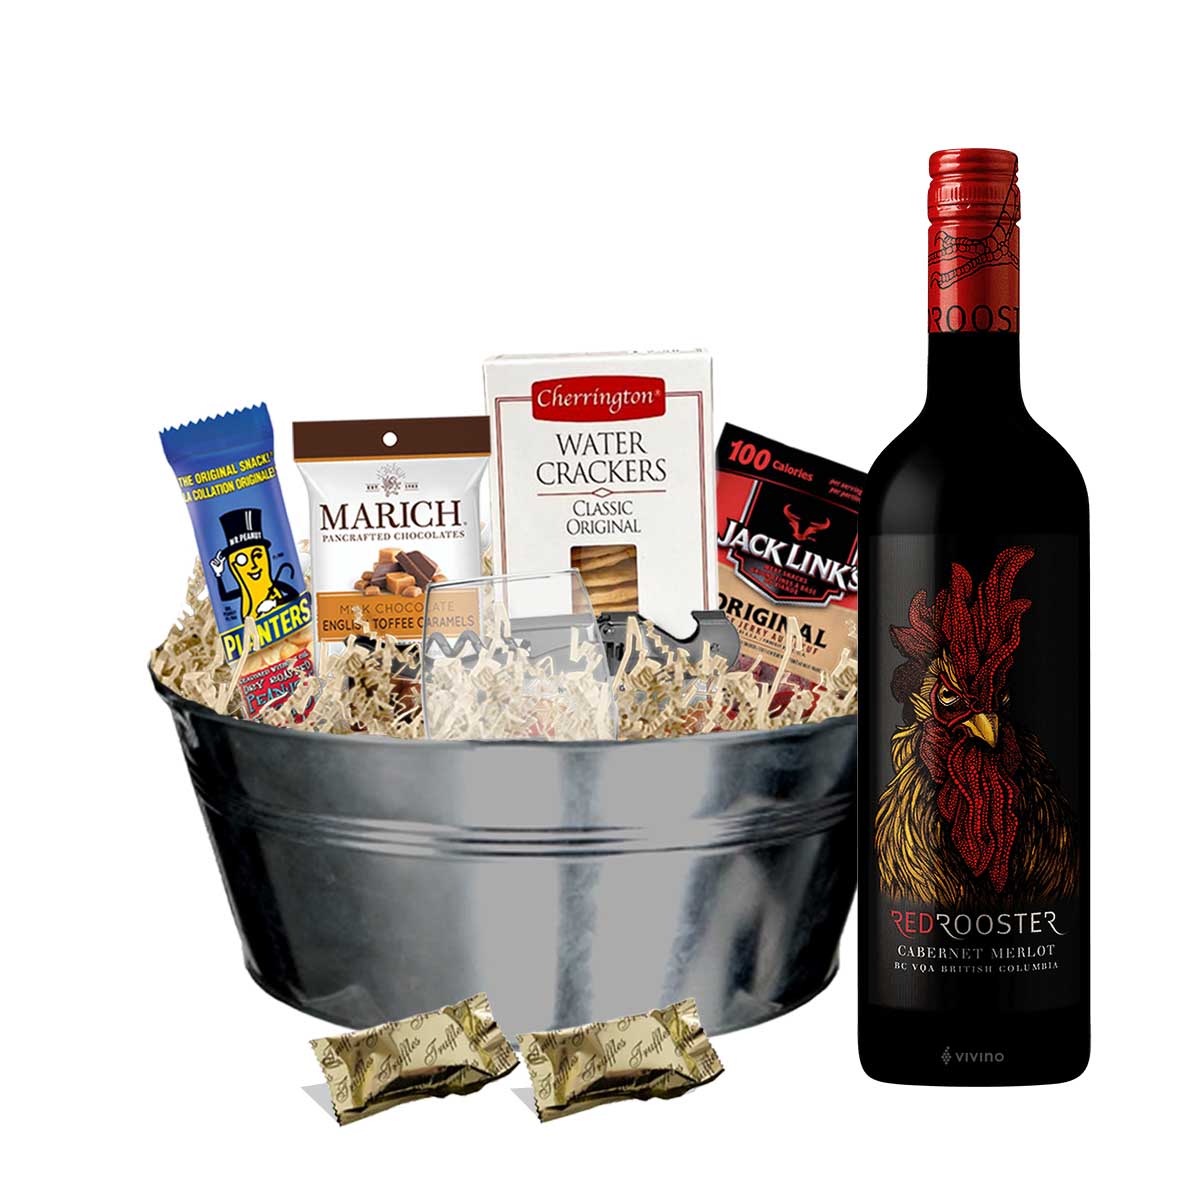 TAG Liquor Stores BC - Red Rooster Winery Cabernet Merlot 750ml Gift Basket